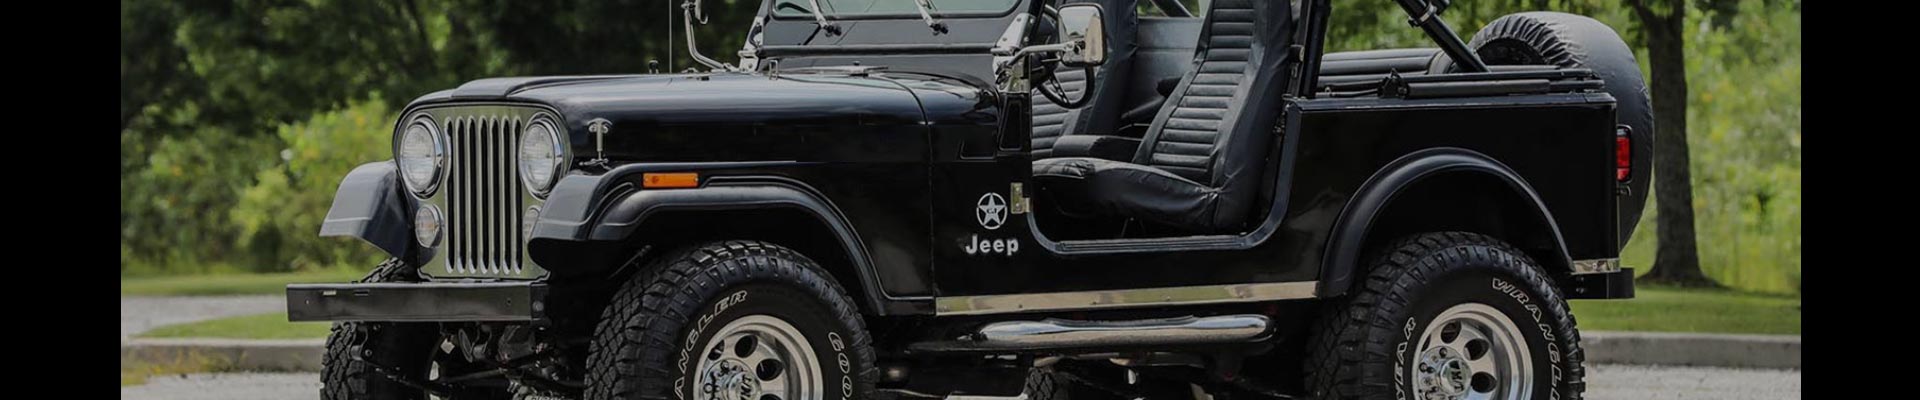 Shop Replacement and OEM 1984 Jeep CJ7 Parts with Discounted Price on the Net